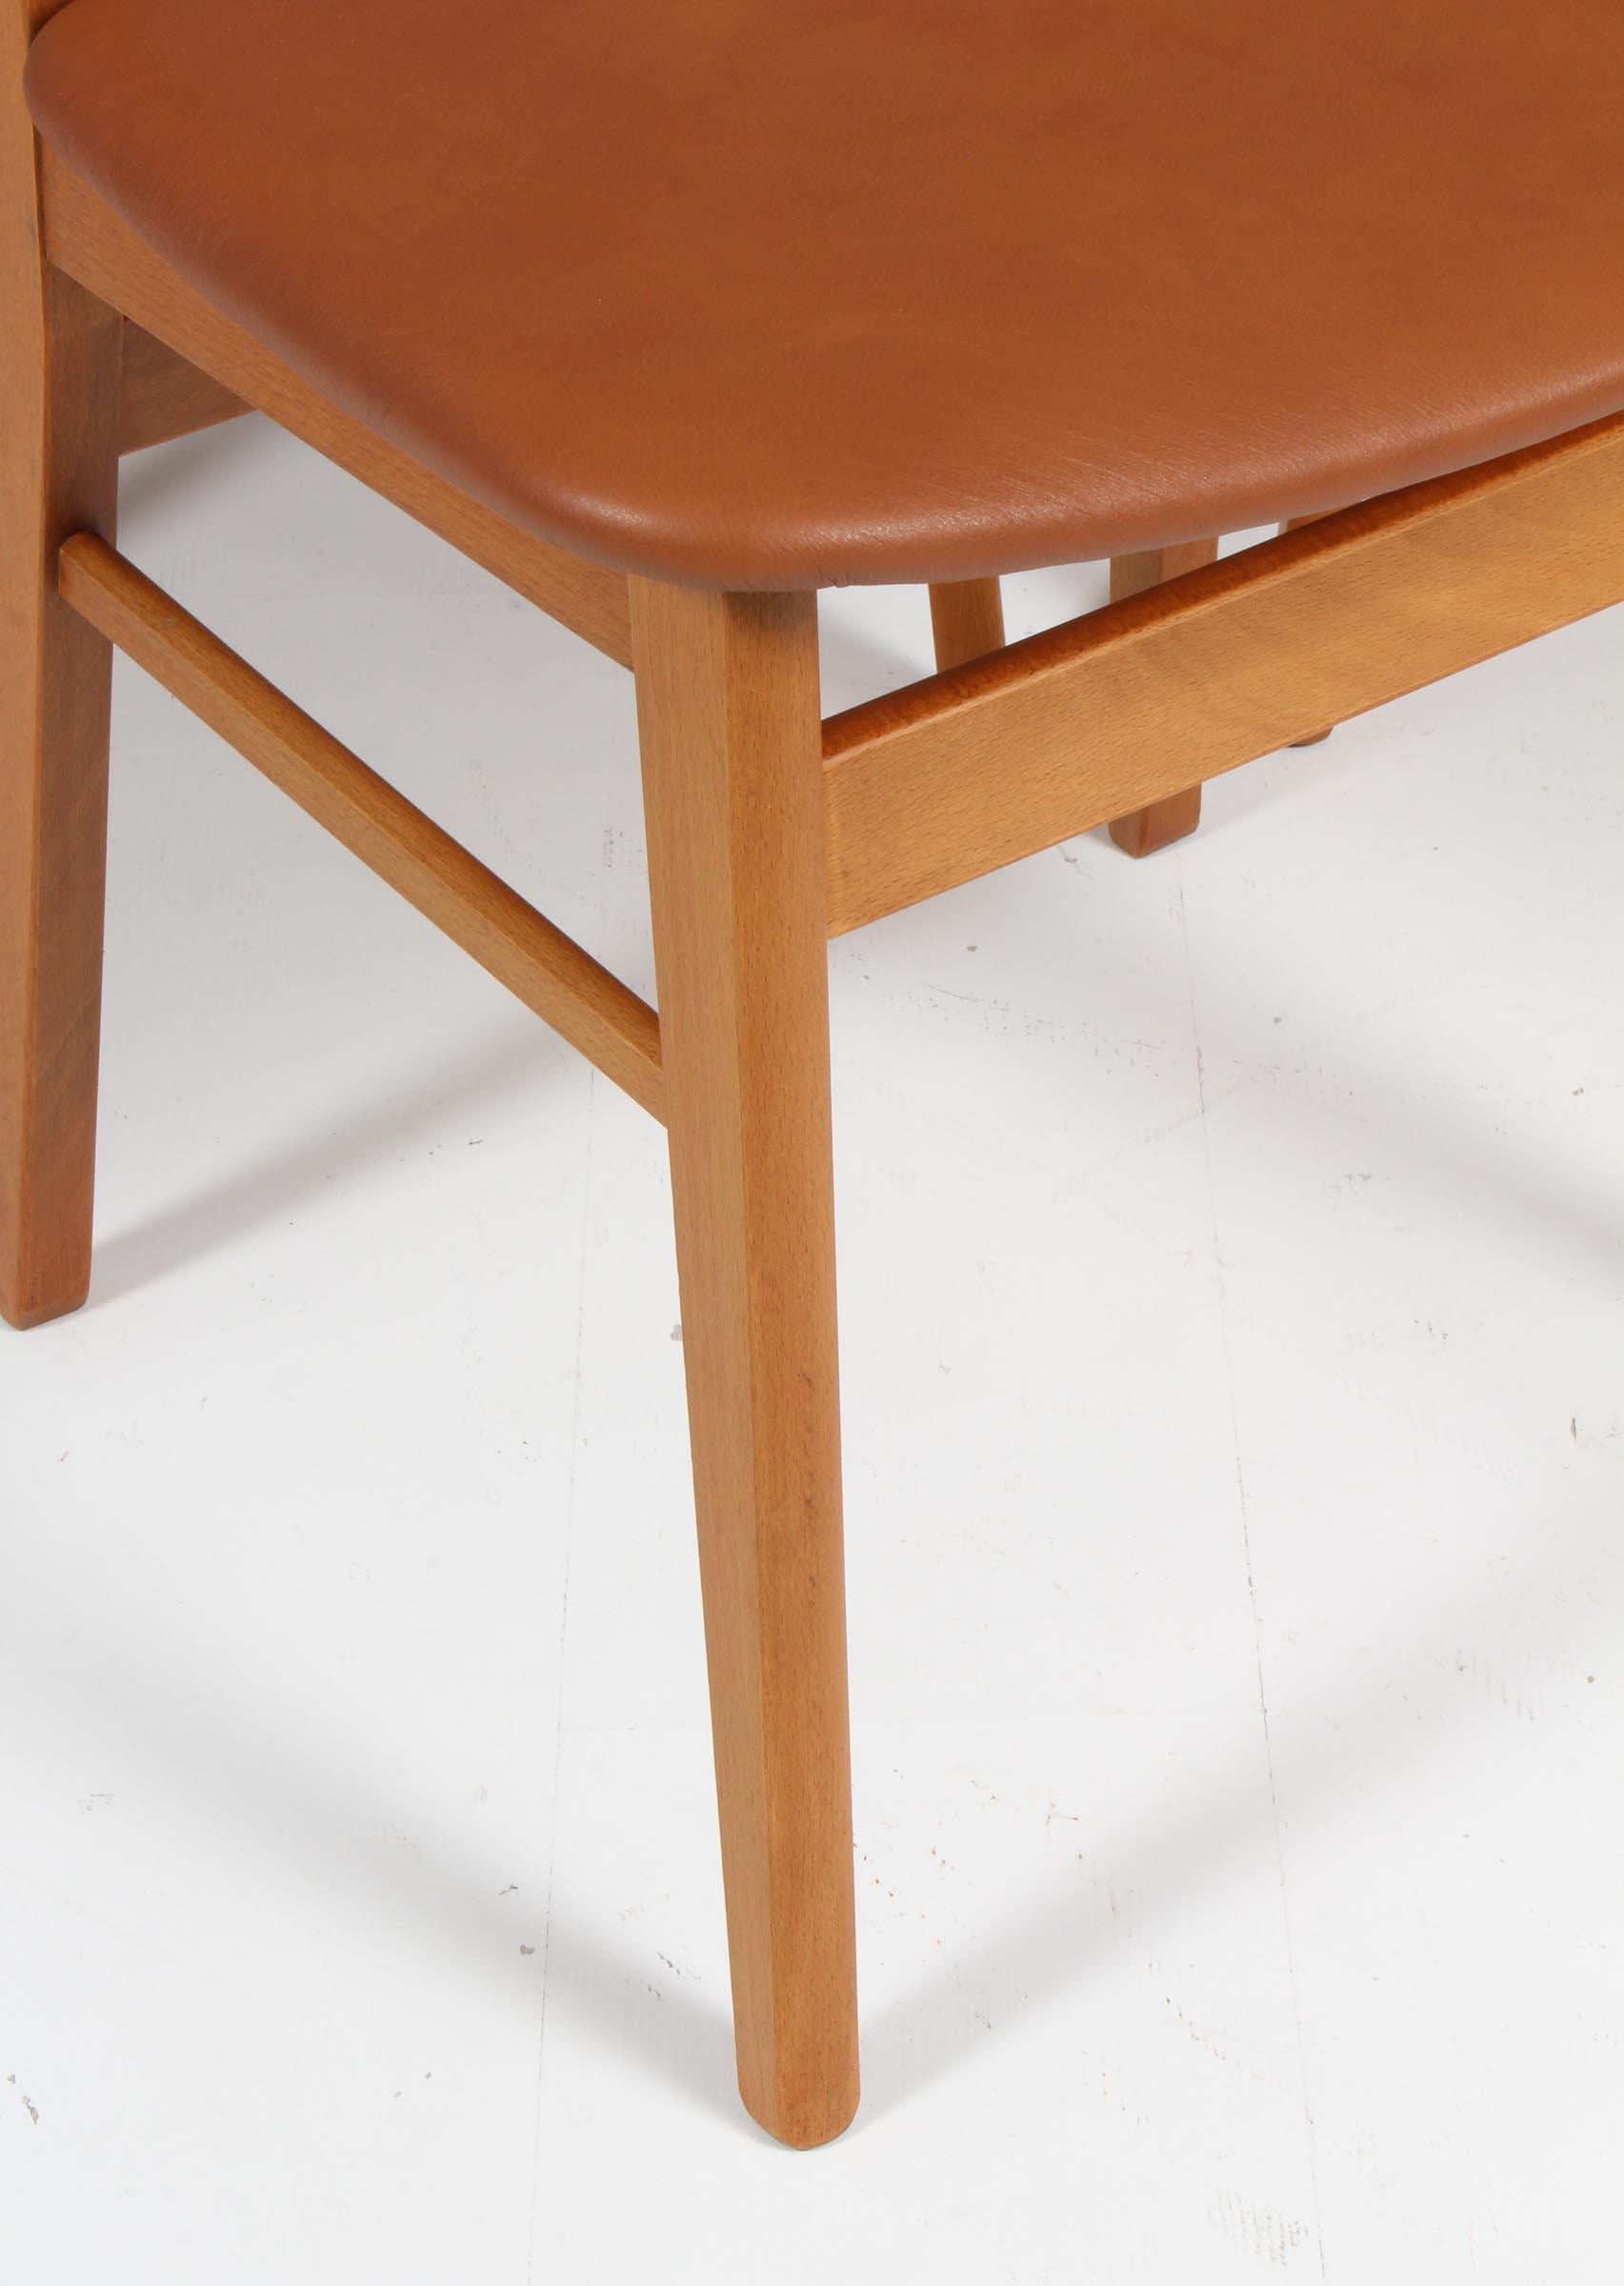 Scandinavian Modern Farstrup Set of Dining Chairs in Teak and Aniline Leather. Denmark, 1960s For Sale